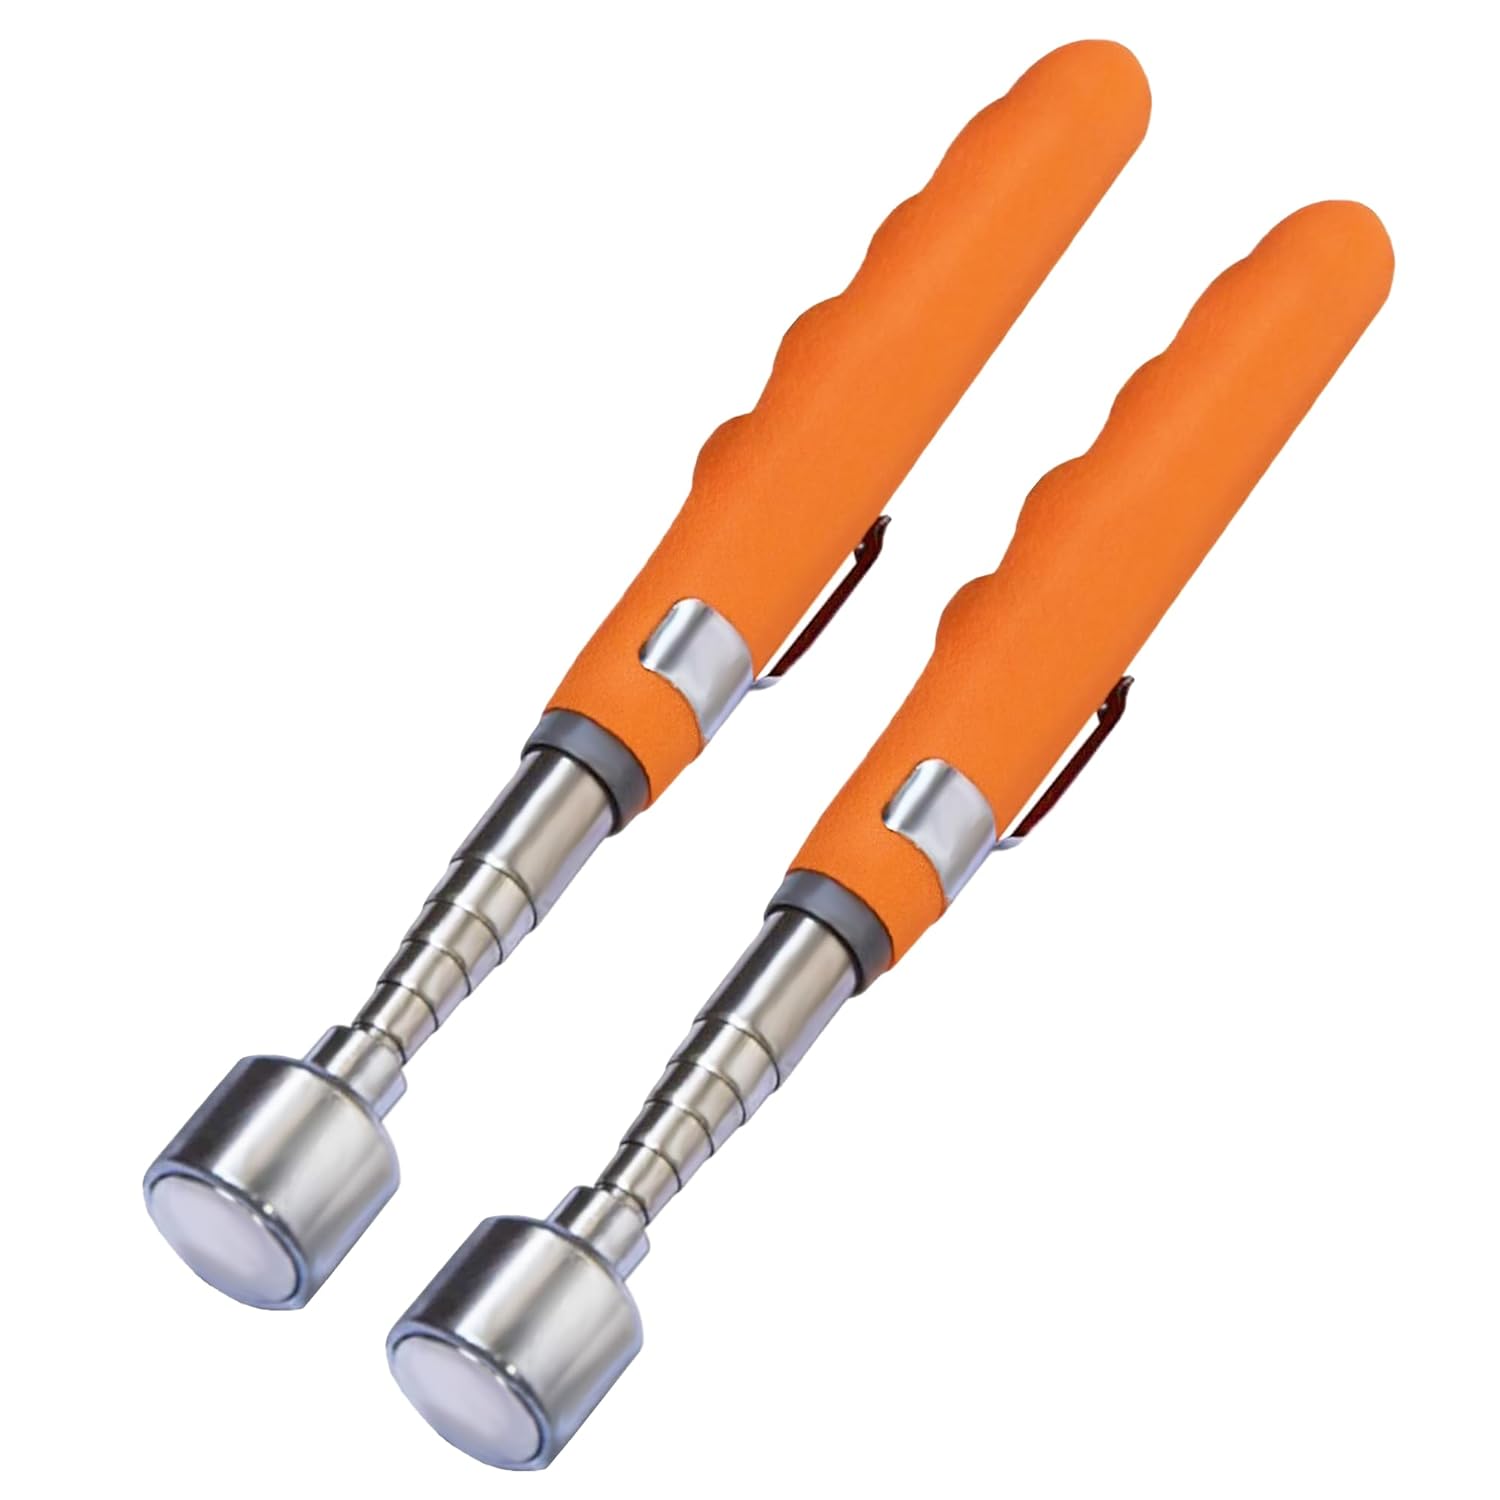 DAYSLIVES 2PCS Telescoping Magnetic Pick Up Tool Extendable 31" 20 lb